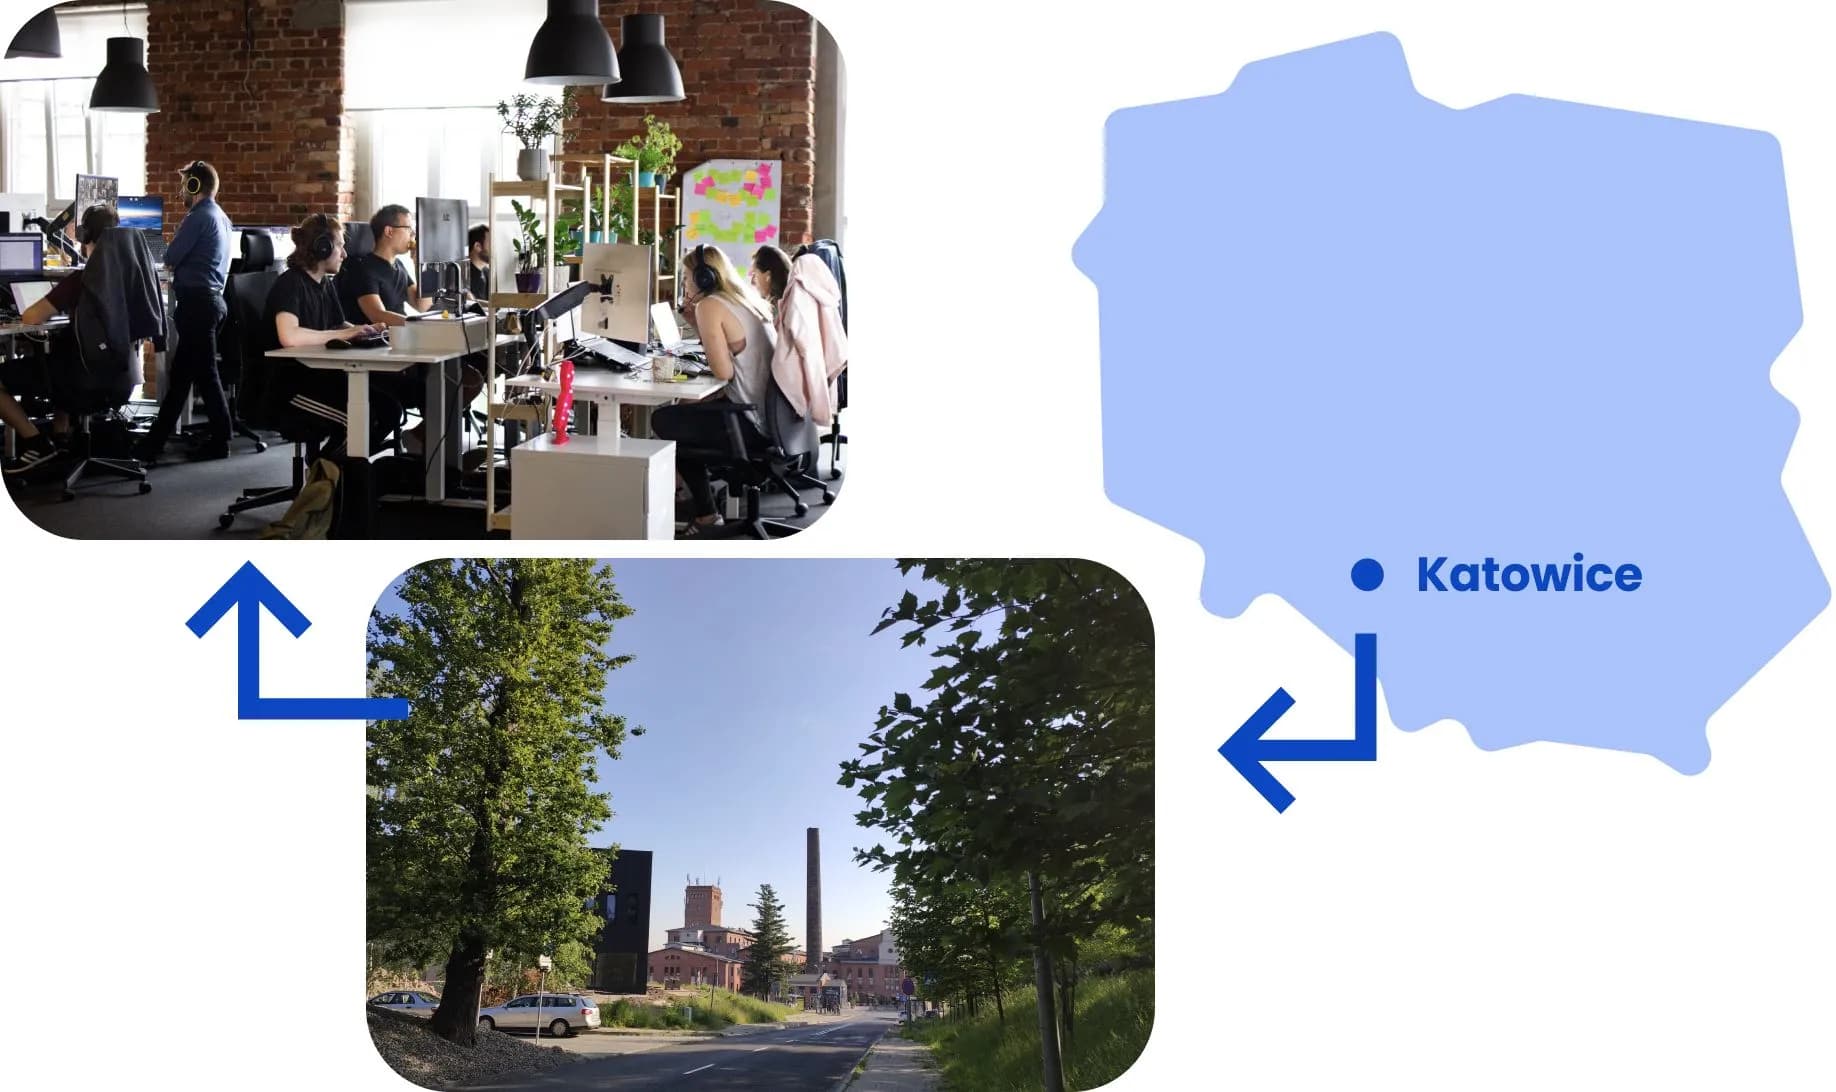 Three images connected with arrows, showing the location of Revolve Healthcare office on the map of Poland, in Fabryka Porcelany in Karowice, and the inside of the office